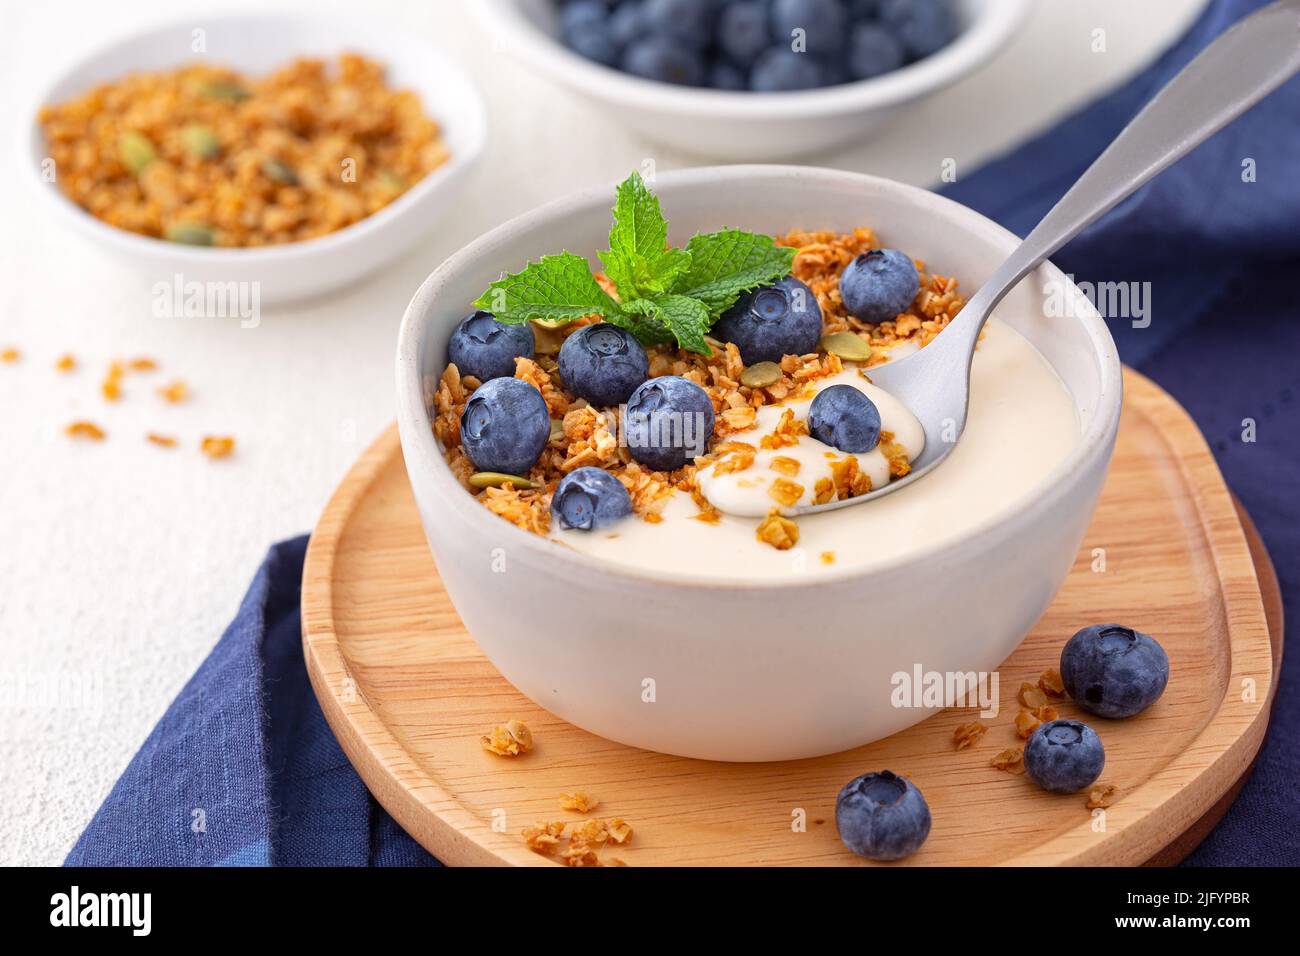 Dairy free almond milk yogurt topped with granola and blueberries with copy space Stock Photo